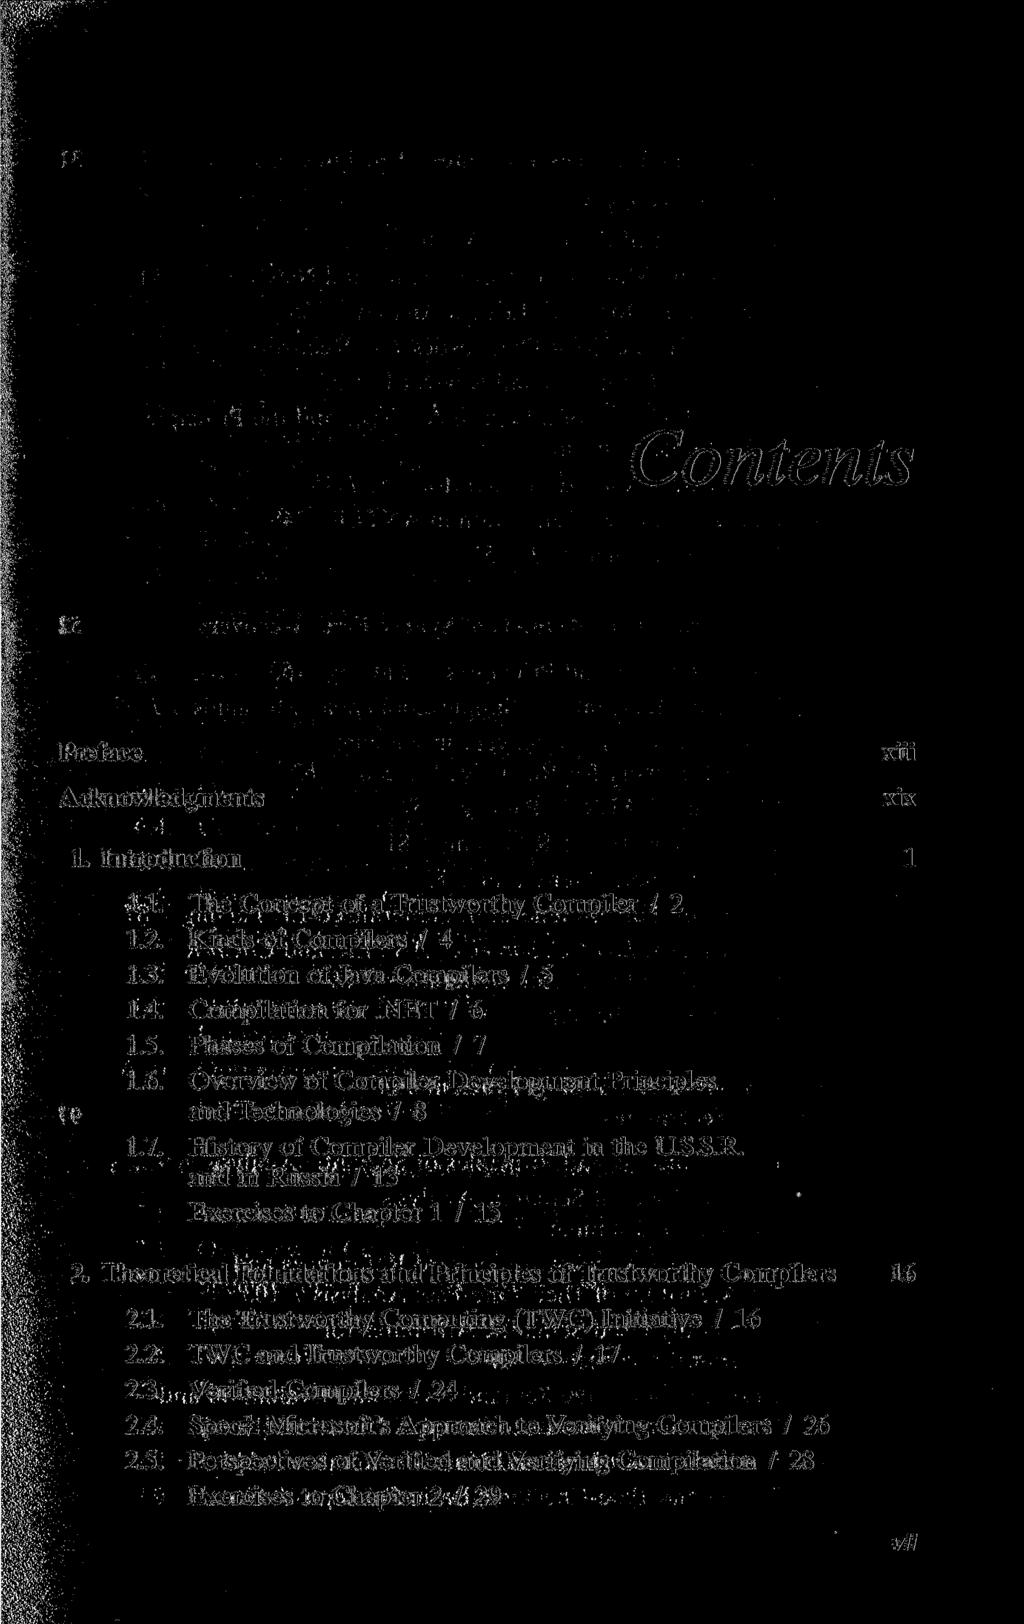 Contents Preface Acknowledgments xüi xix 1. Introduction 1 1.1. The Concept of a Trustworthy Compiler / 2 1.2. Kinds of Compilers / 4 1.3. Evolution of Java Compilers / 5 1.4. Compilation for.